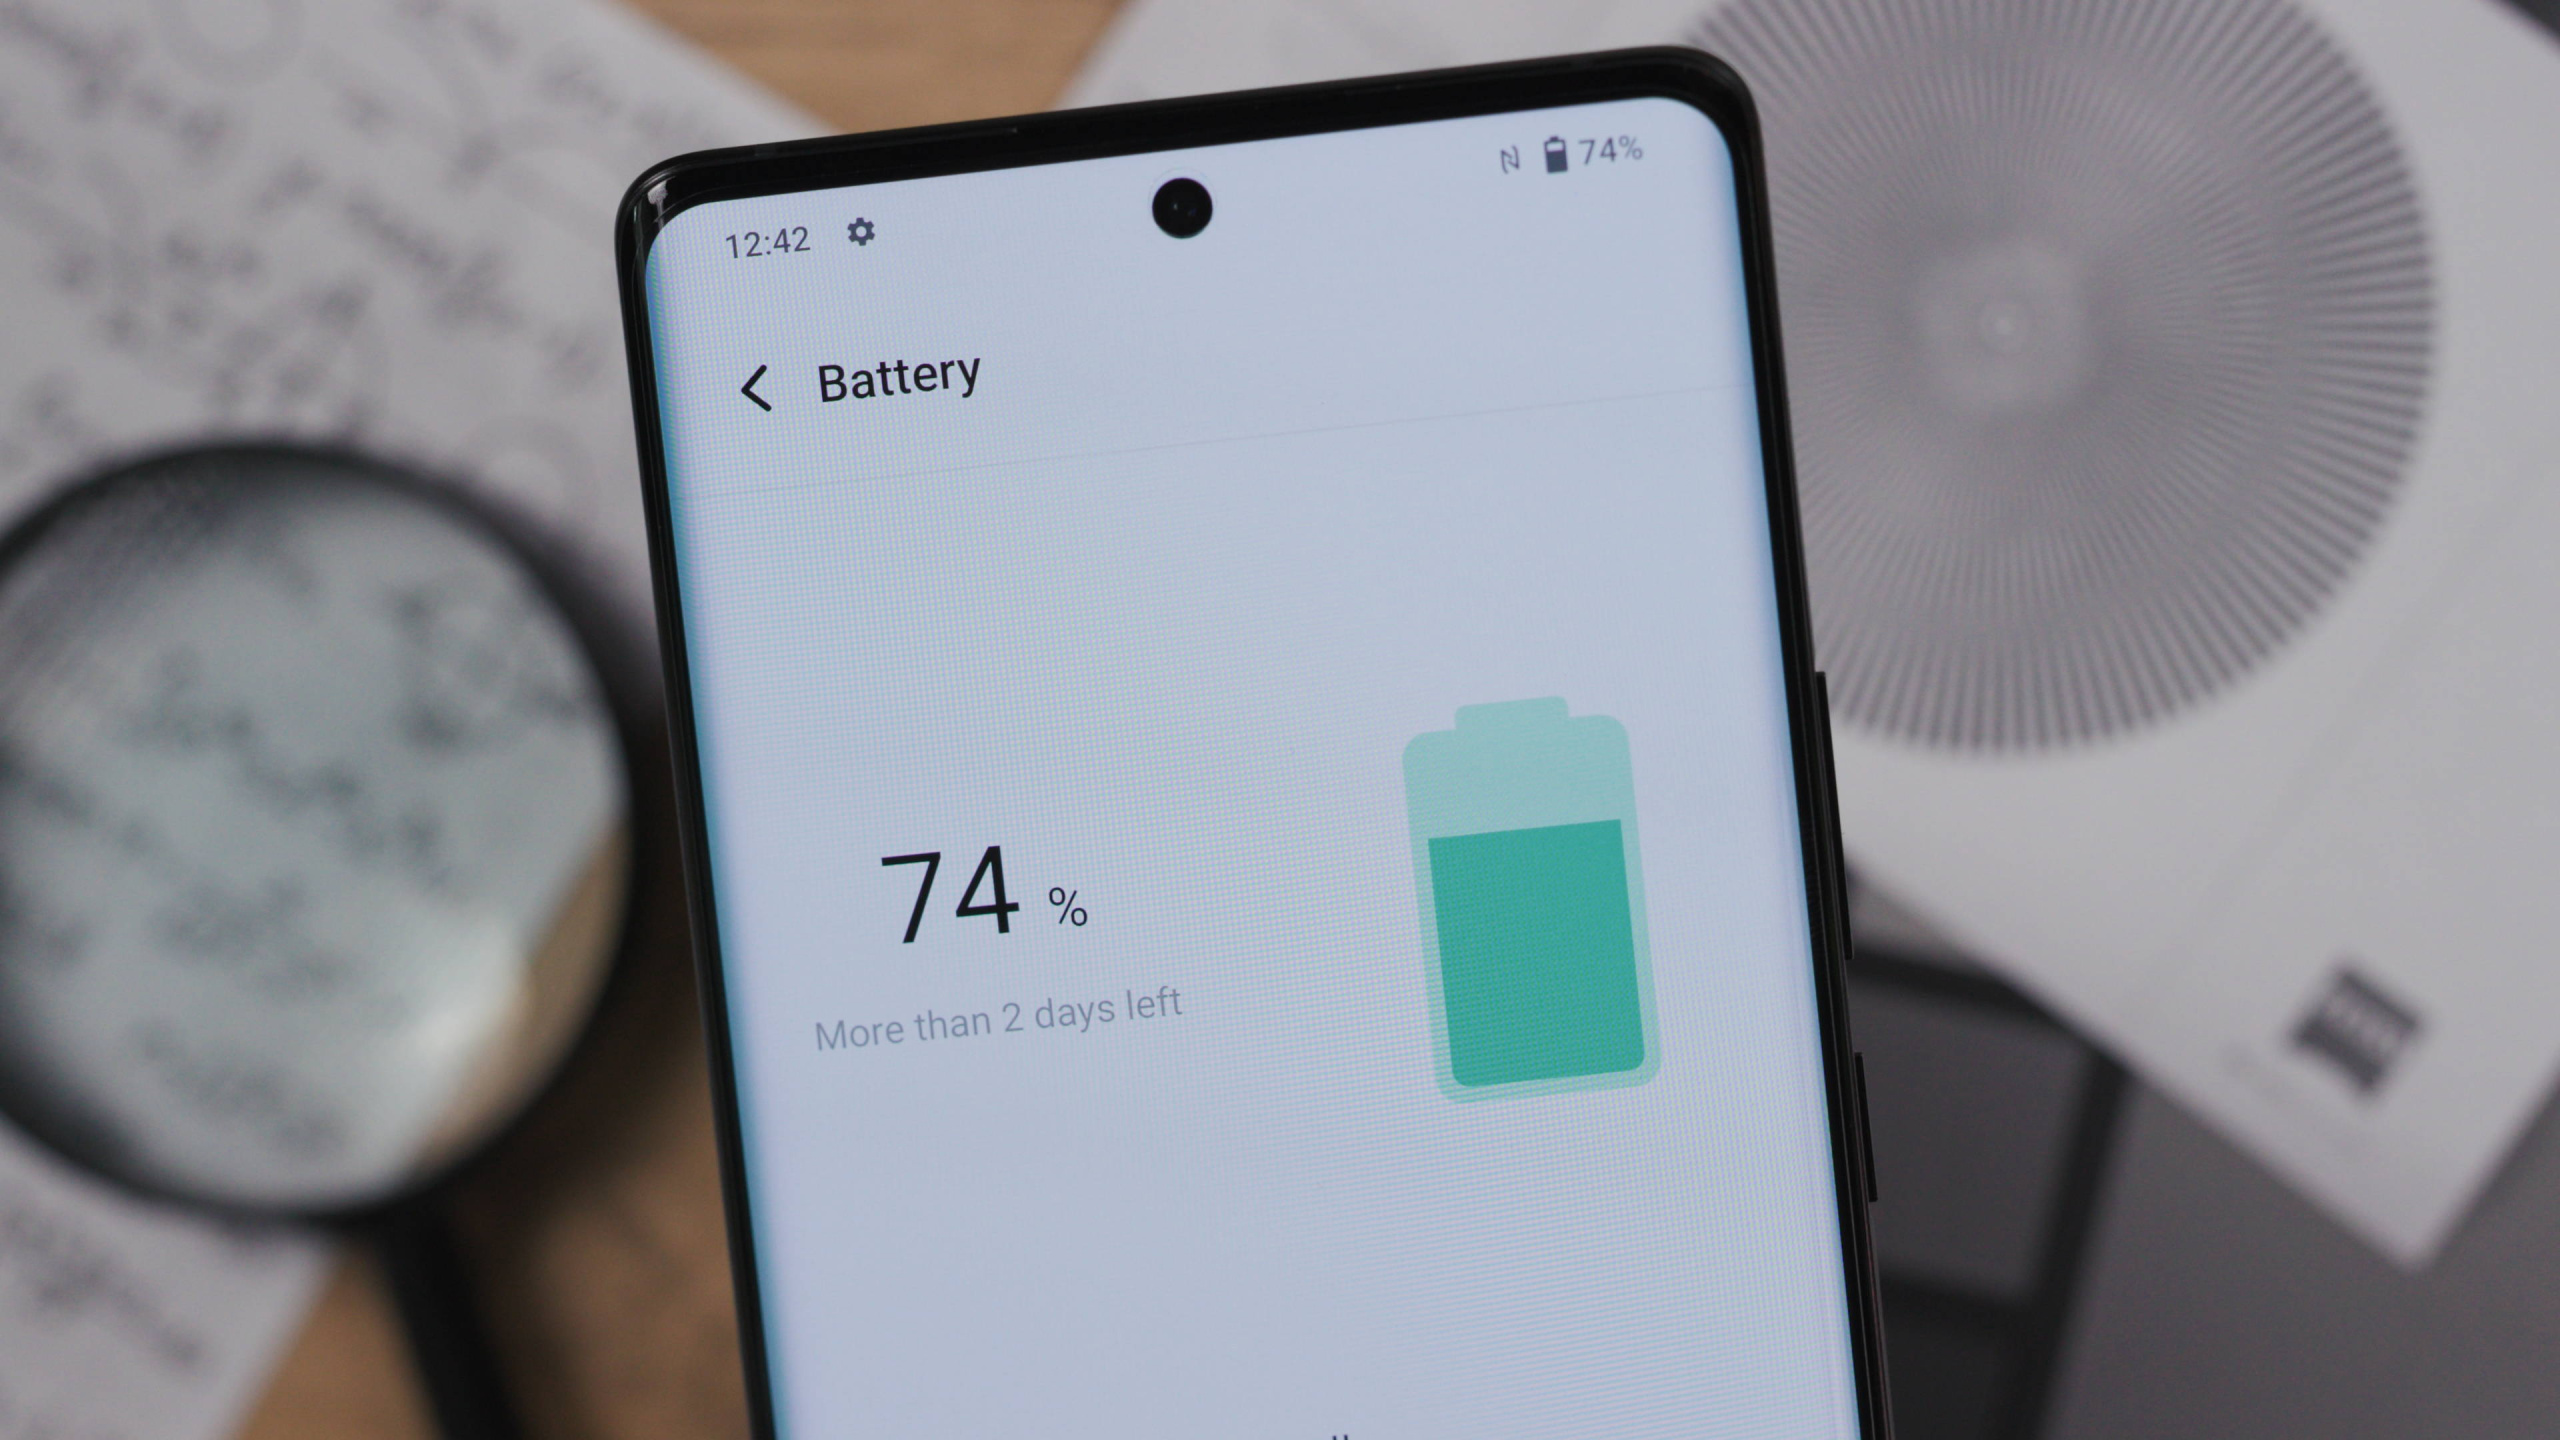 How can one examine the battery health of their phone?